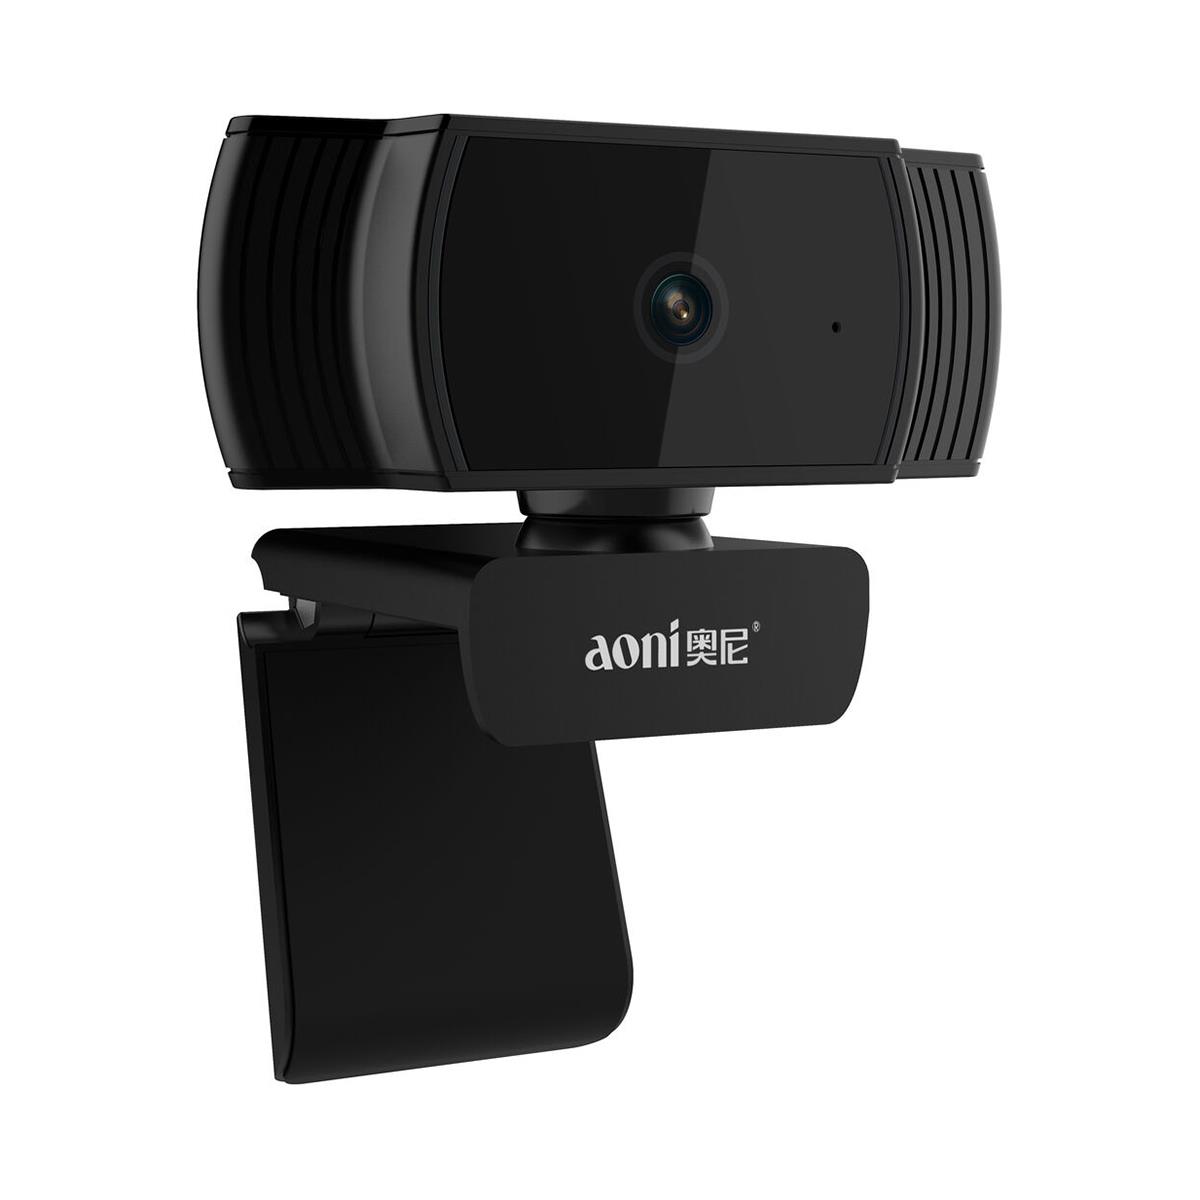 Image of aoni A20 Full HD Webcam with Auto Focus